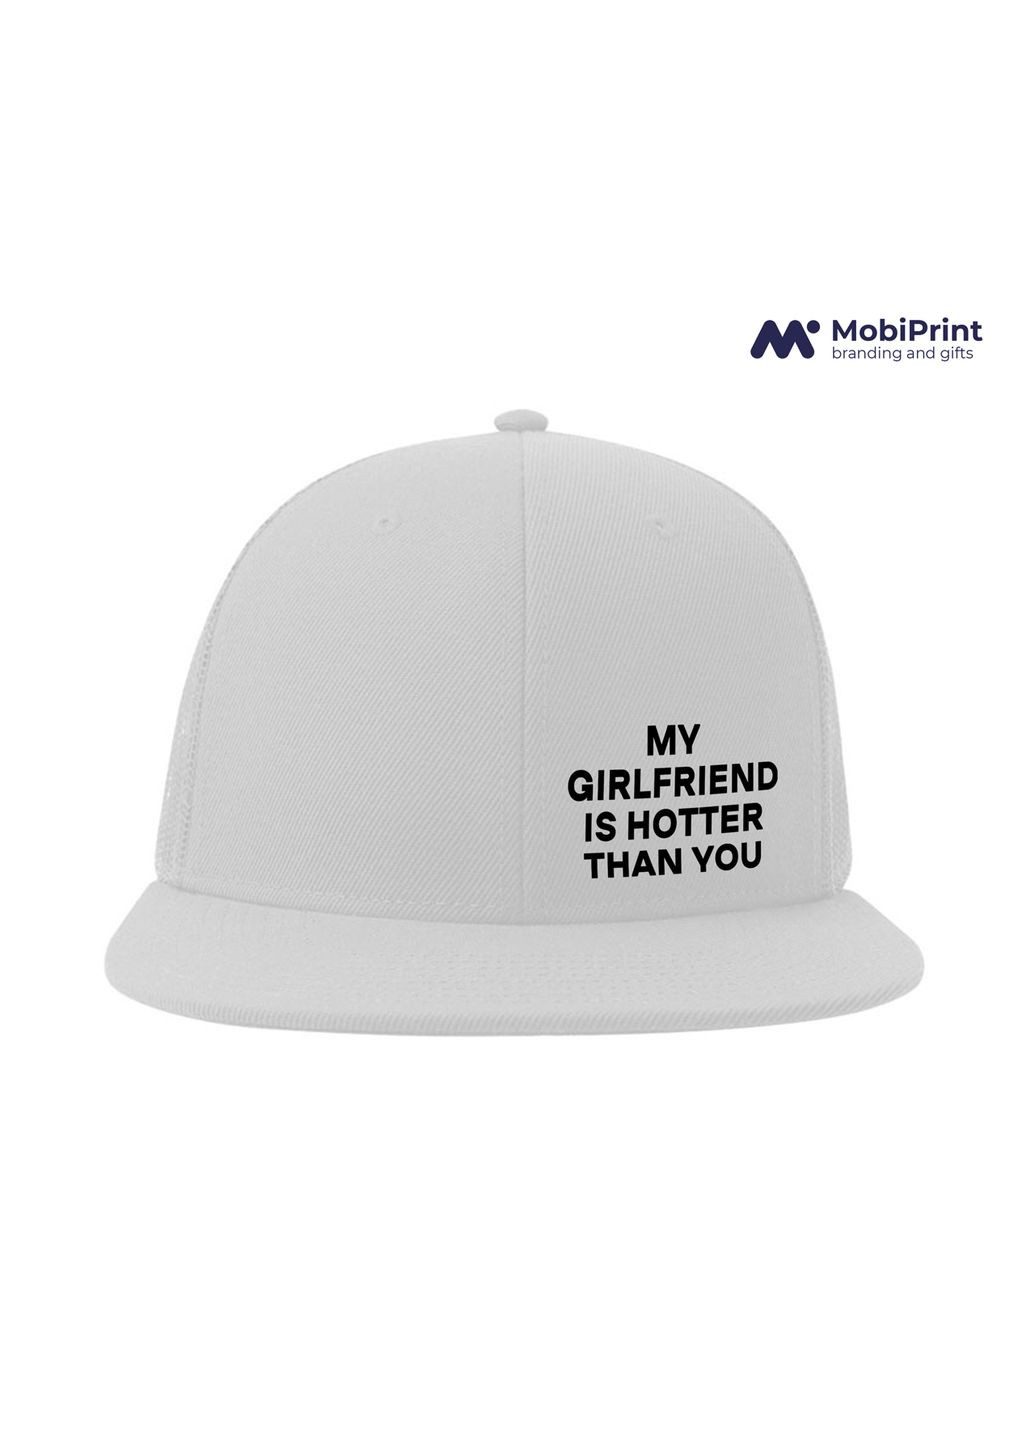 Кепка Snap Mesh My girlfriend hotter than you Белый (9277-4092-WT) MobiPrint (292866269)